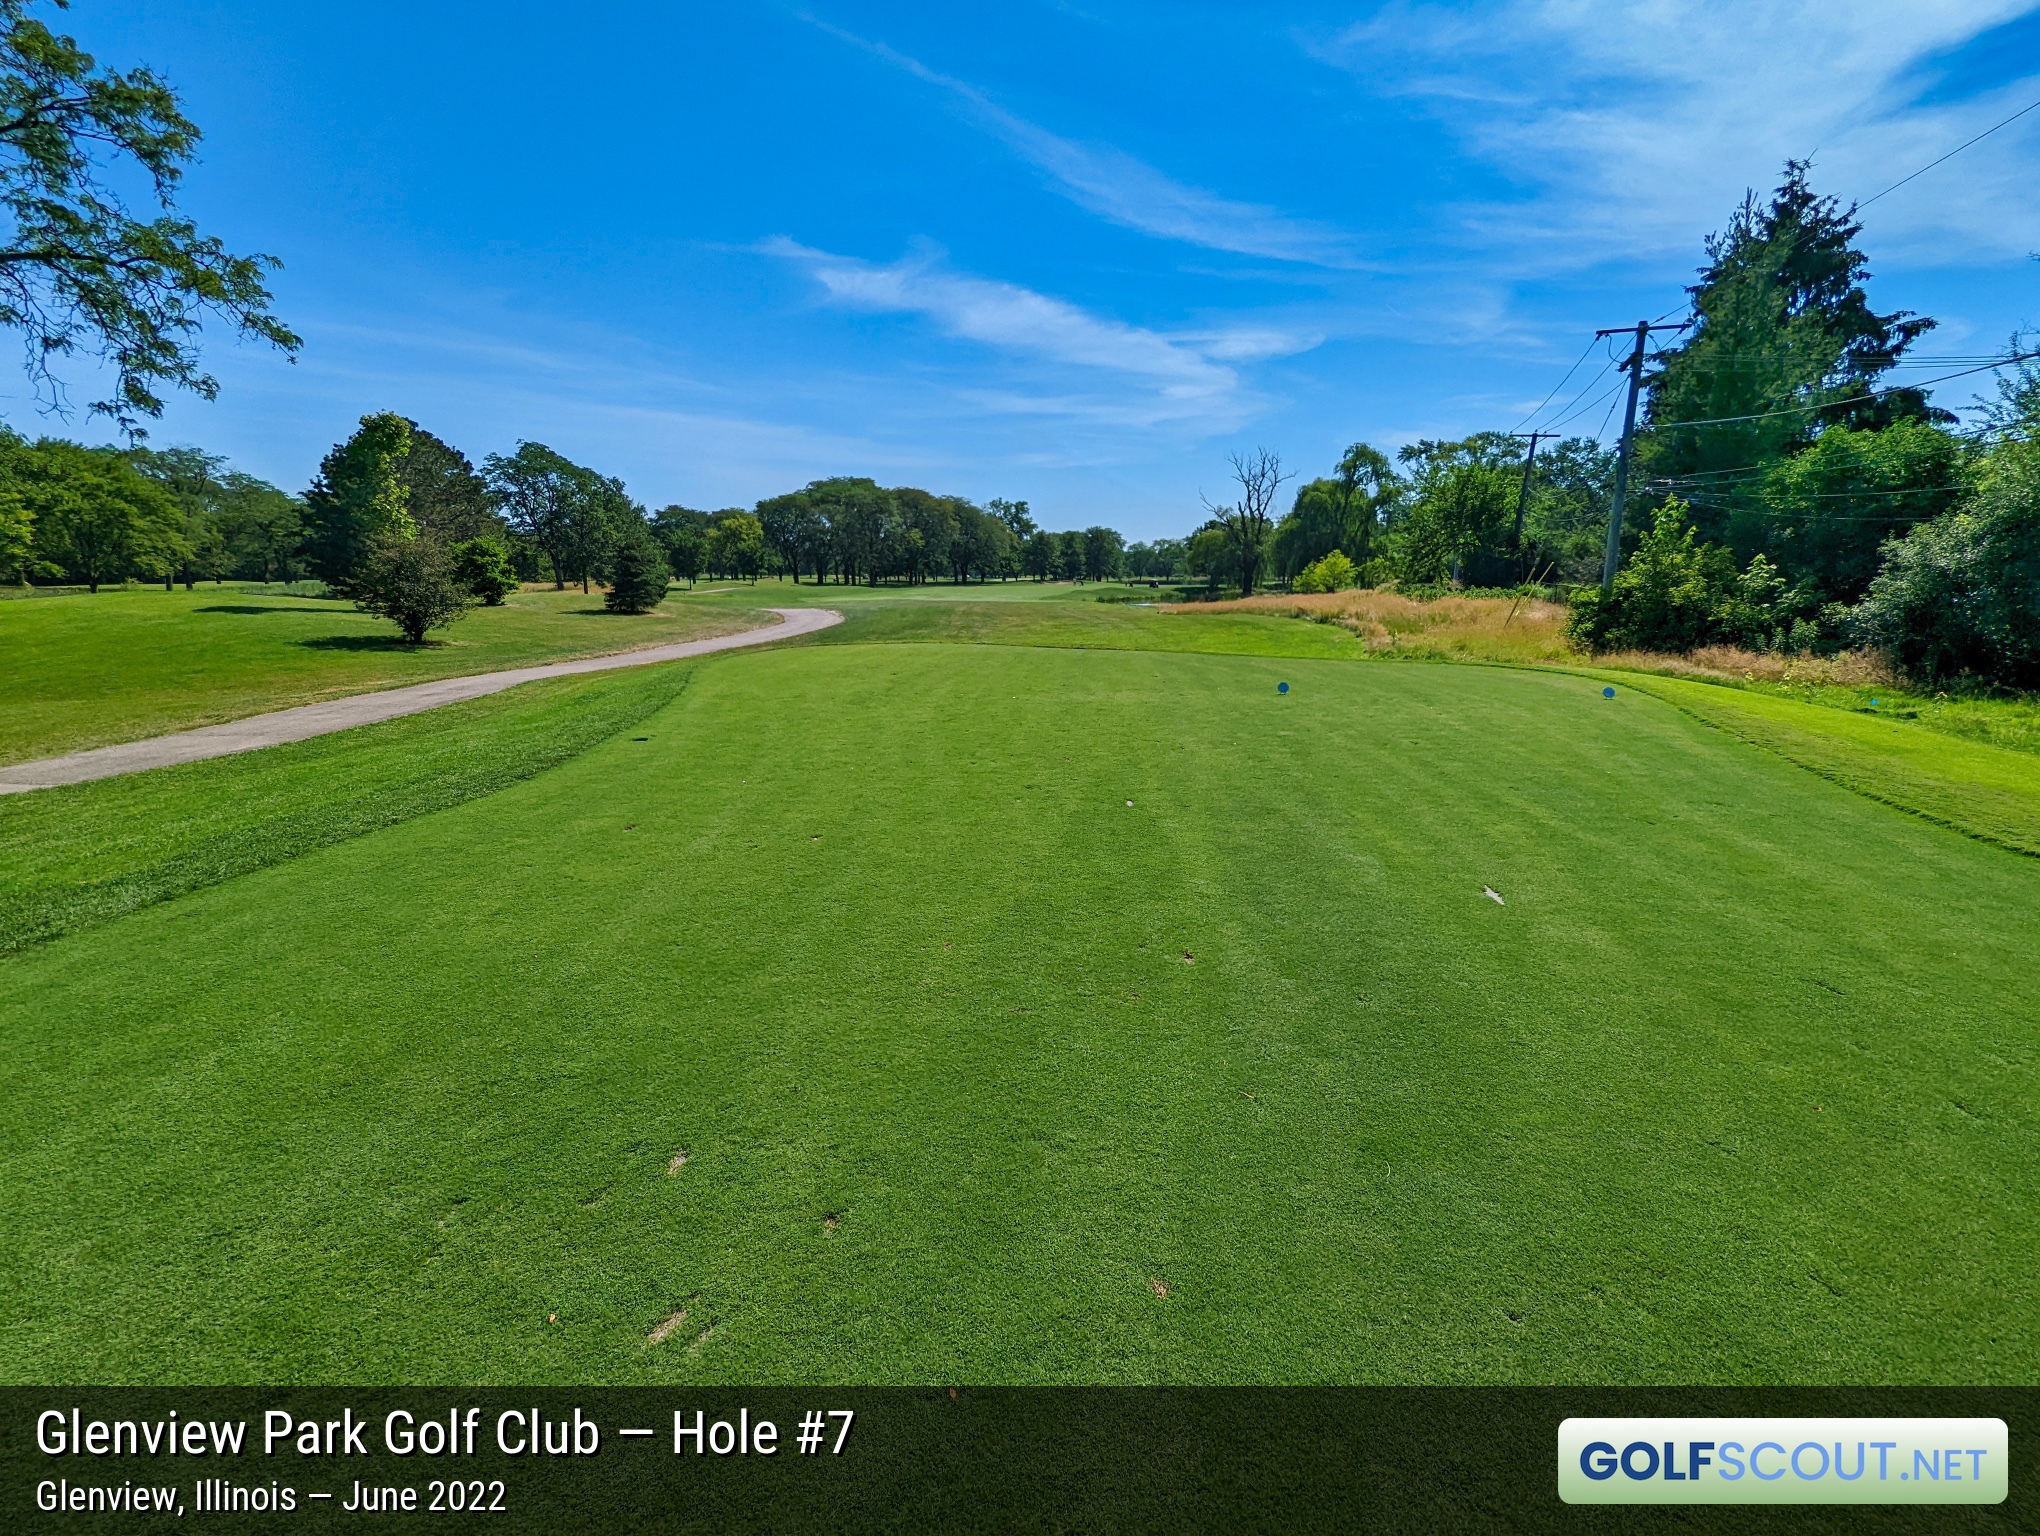 Photo of hole #7 at Glenview Park Golf Club in Glenview, Illinois. 